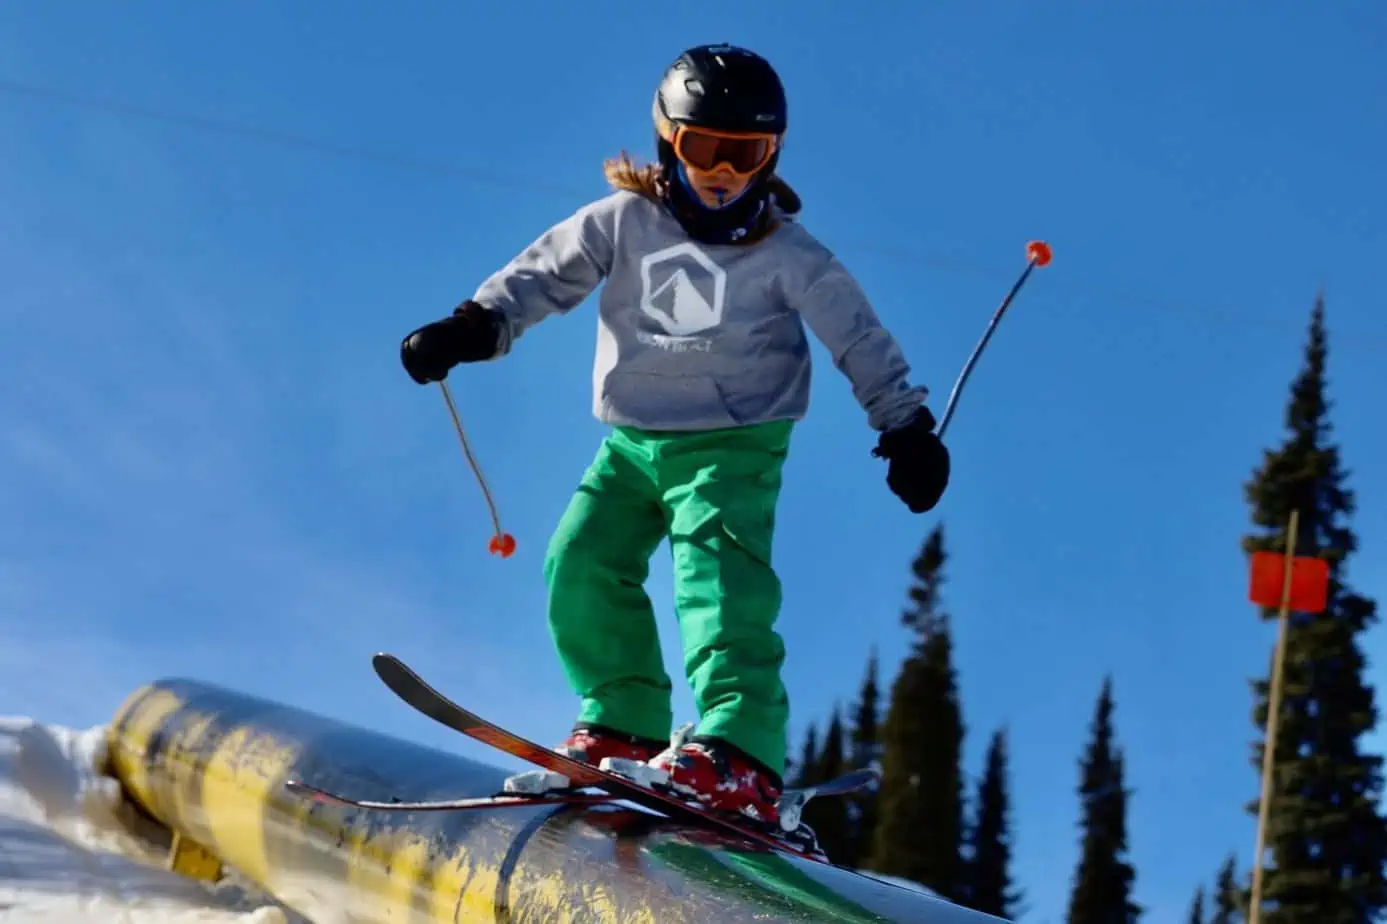 A skier riding a pipe